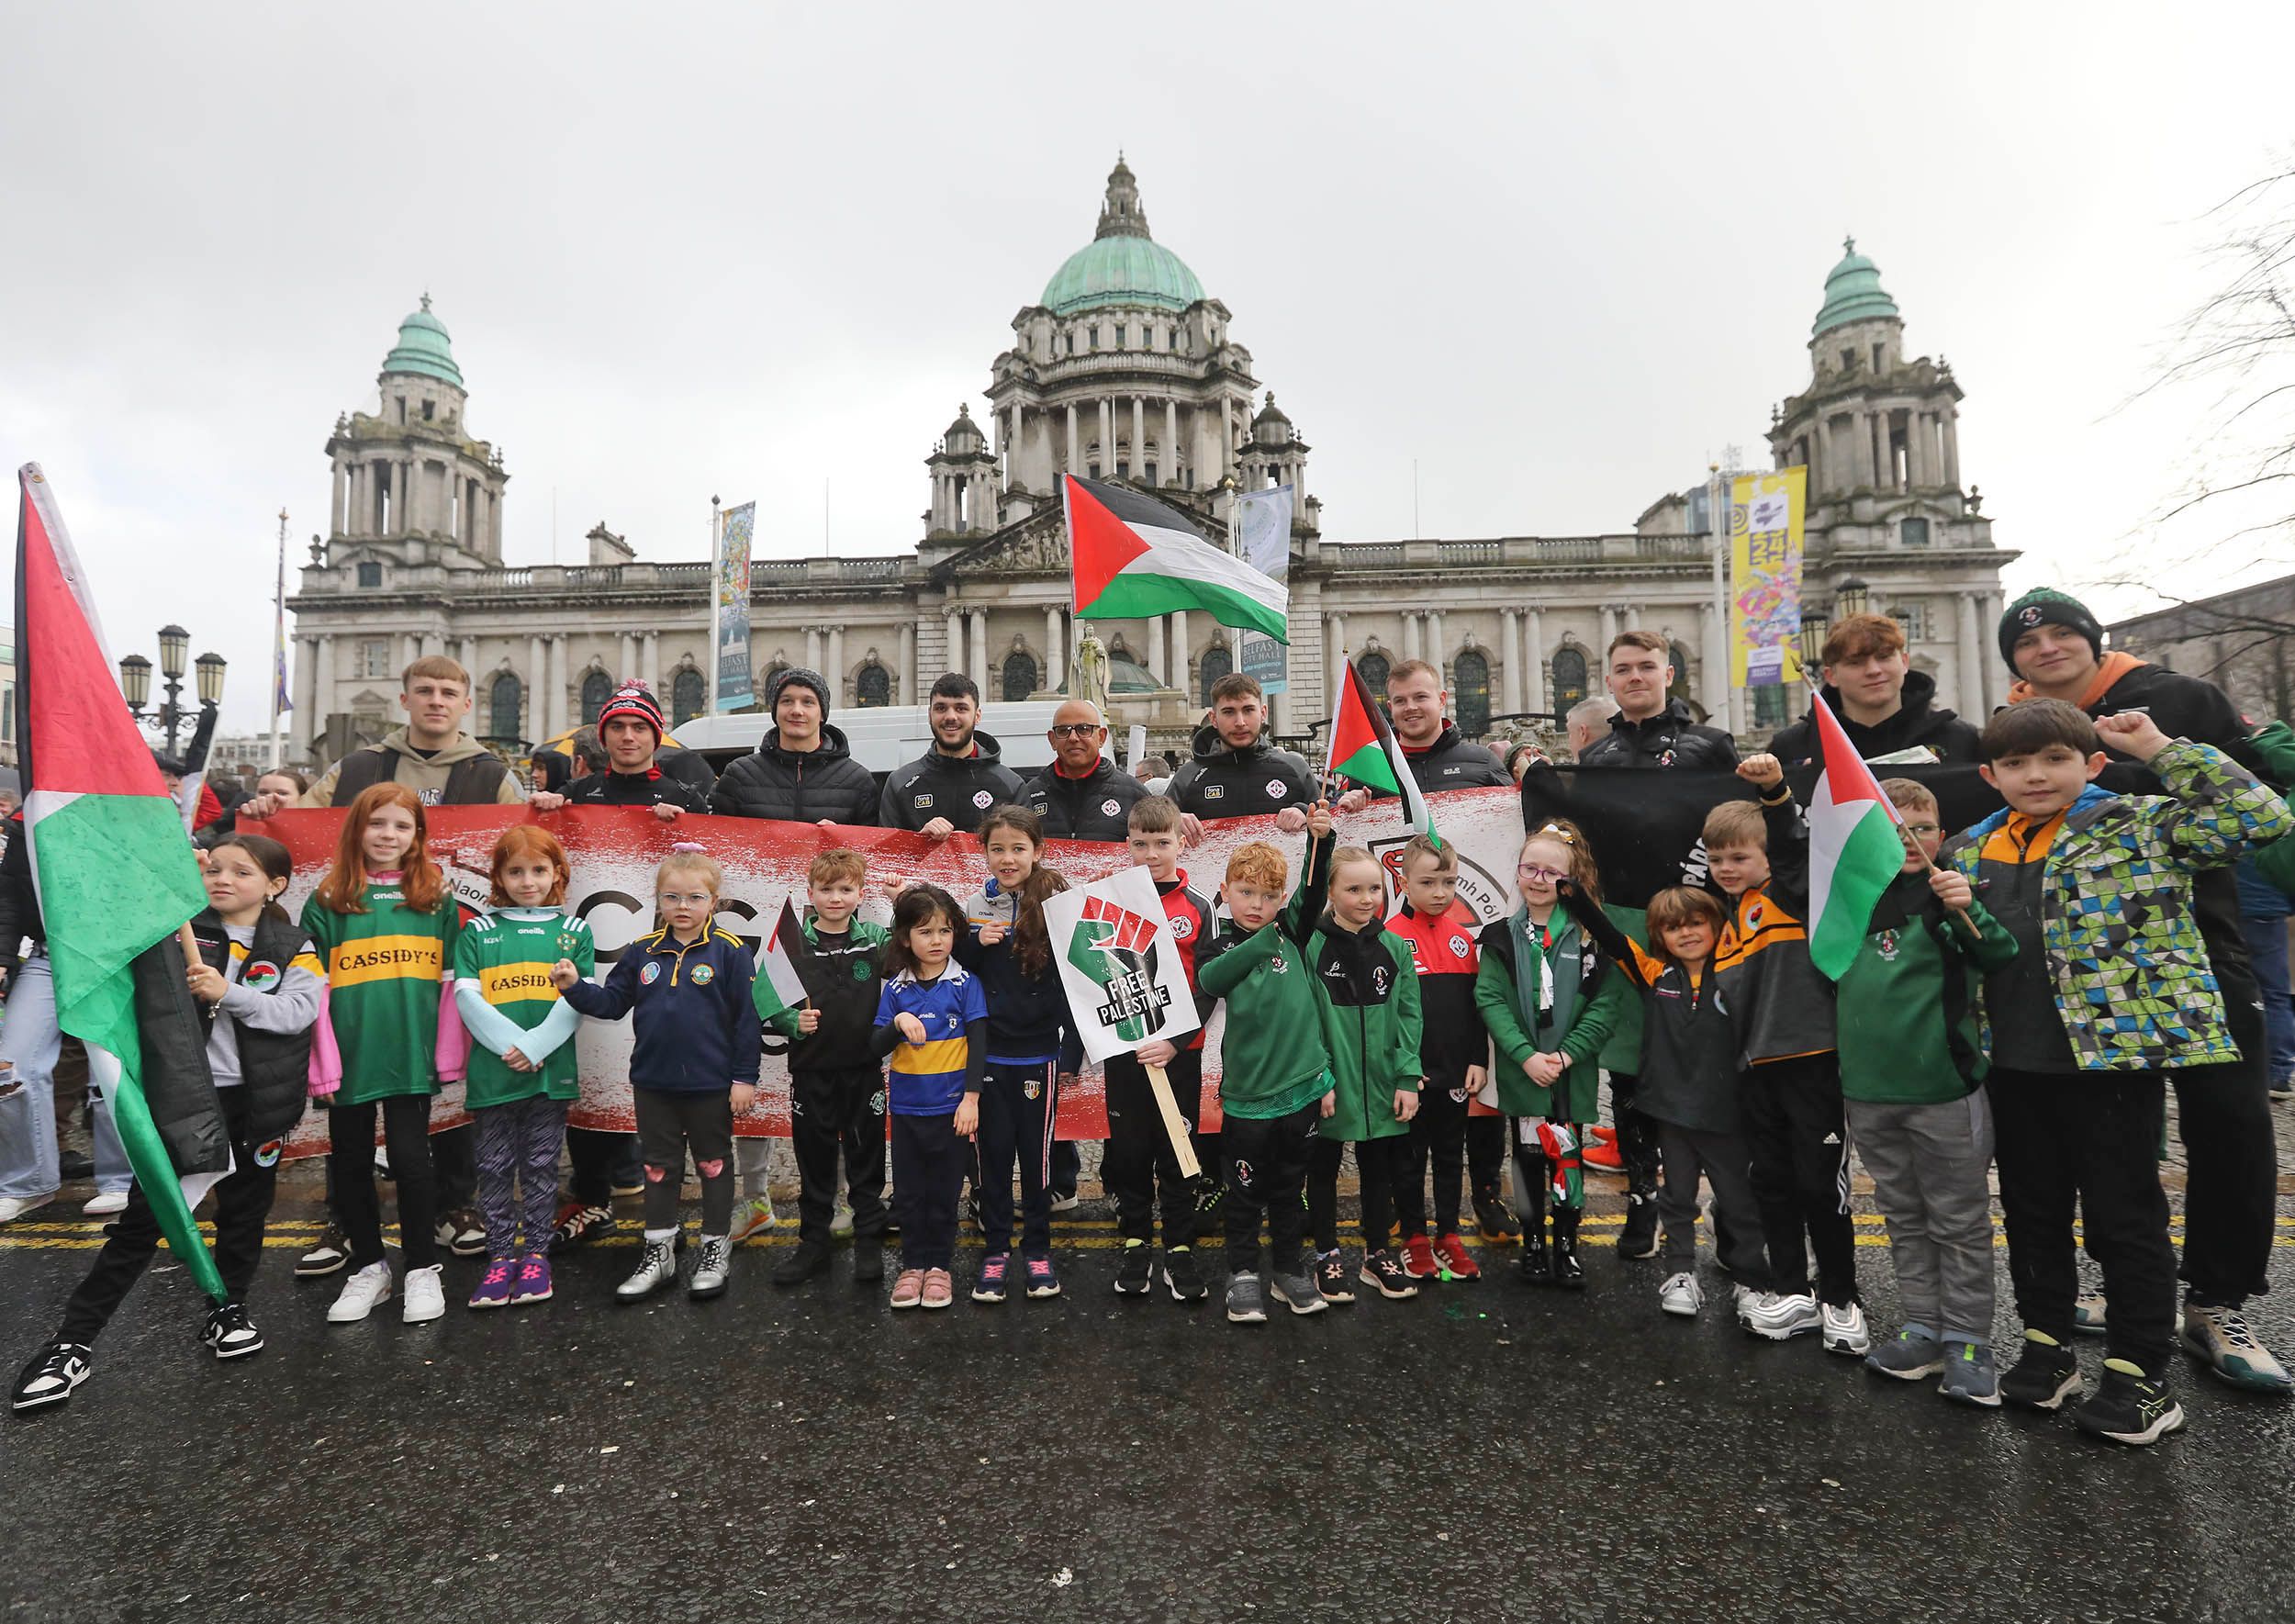 PALESTINE: Thousands of Gaels turned up on Saturday to call for a permanent ceasefire in Gaza and an end to the genocide